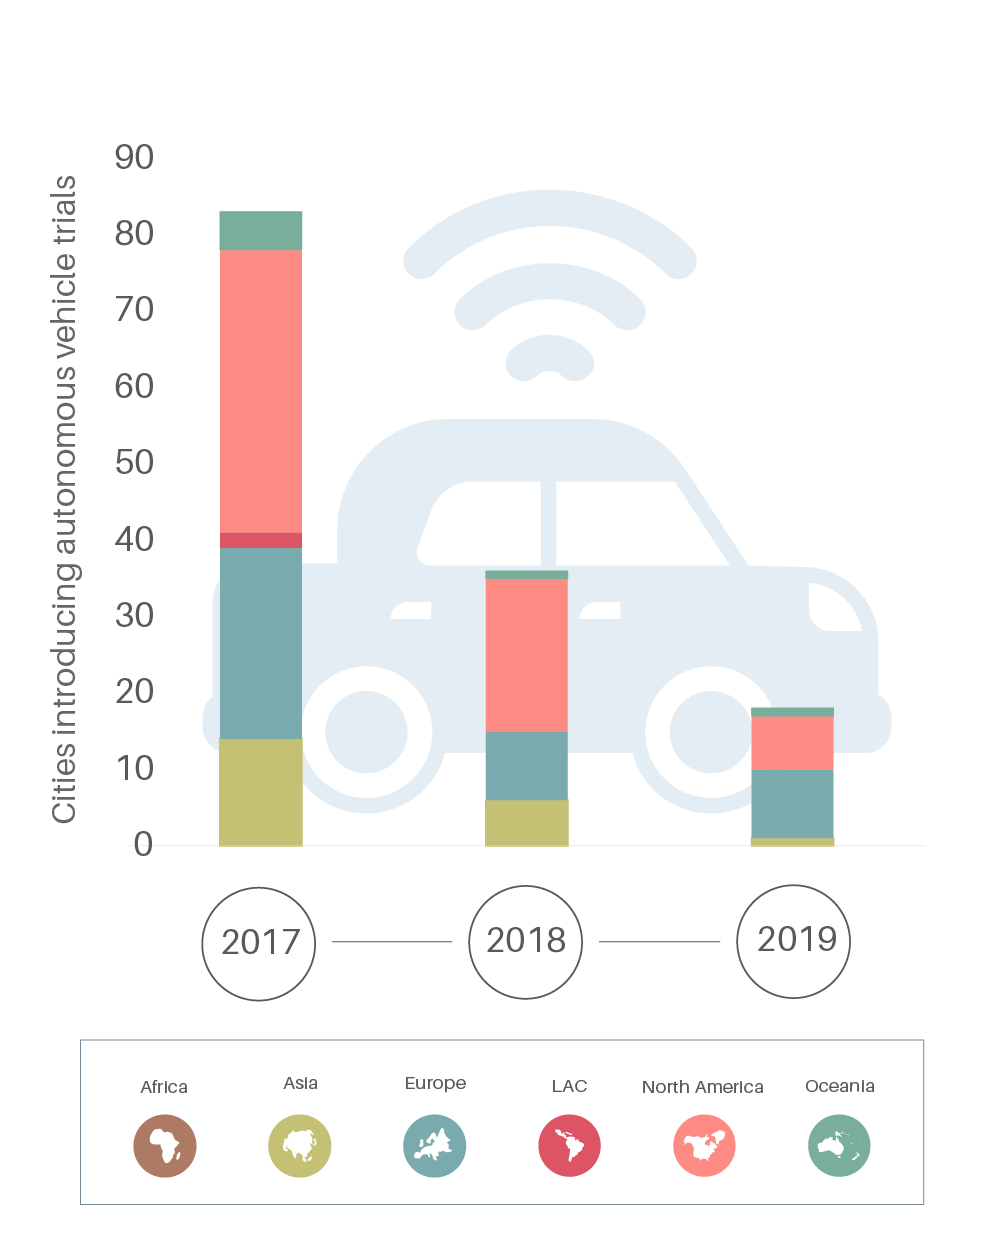 New autonomous vehicle trials in cities, by region, 2017-2019 